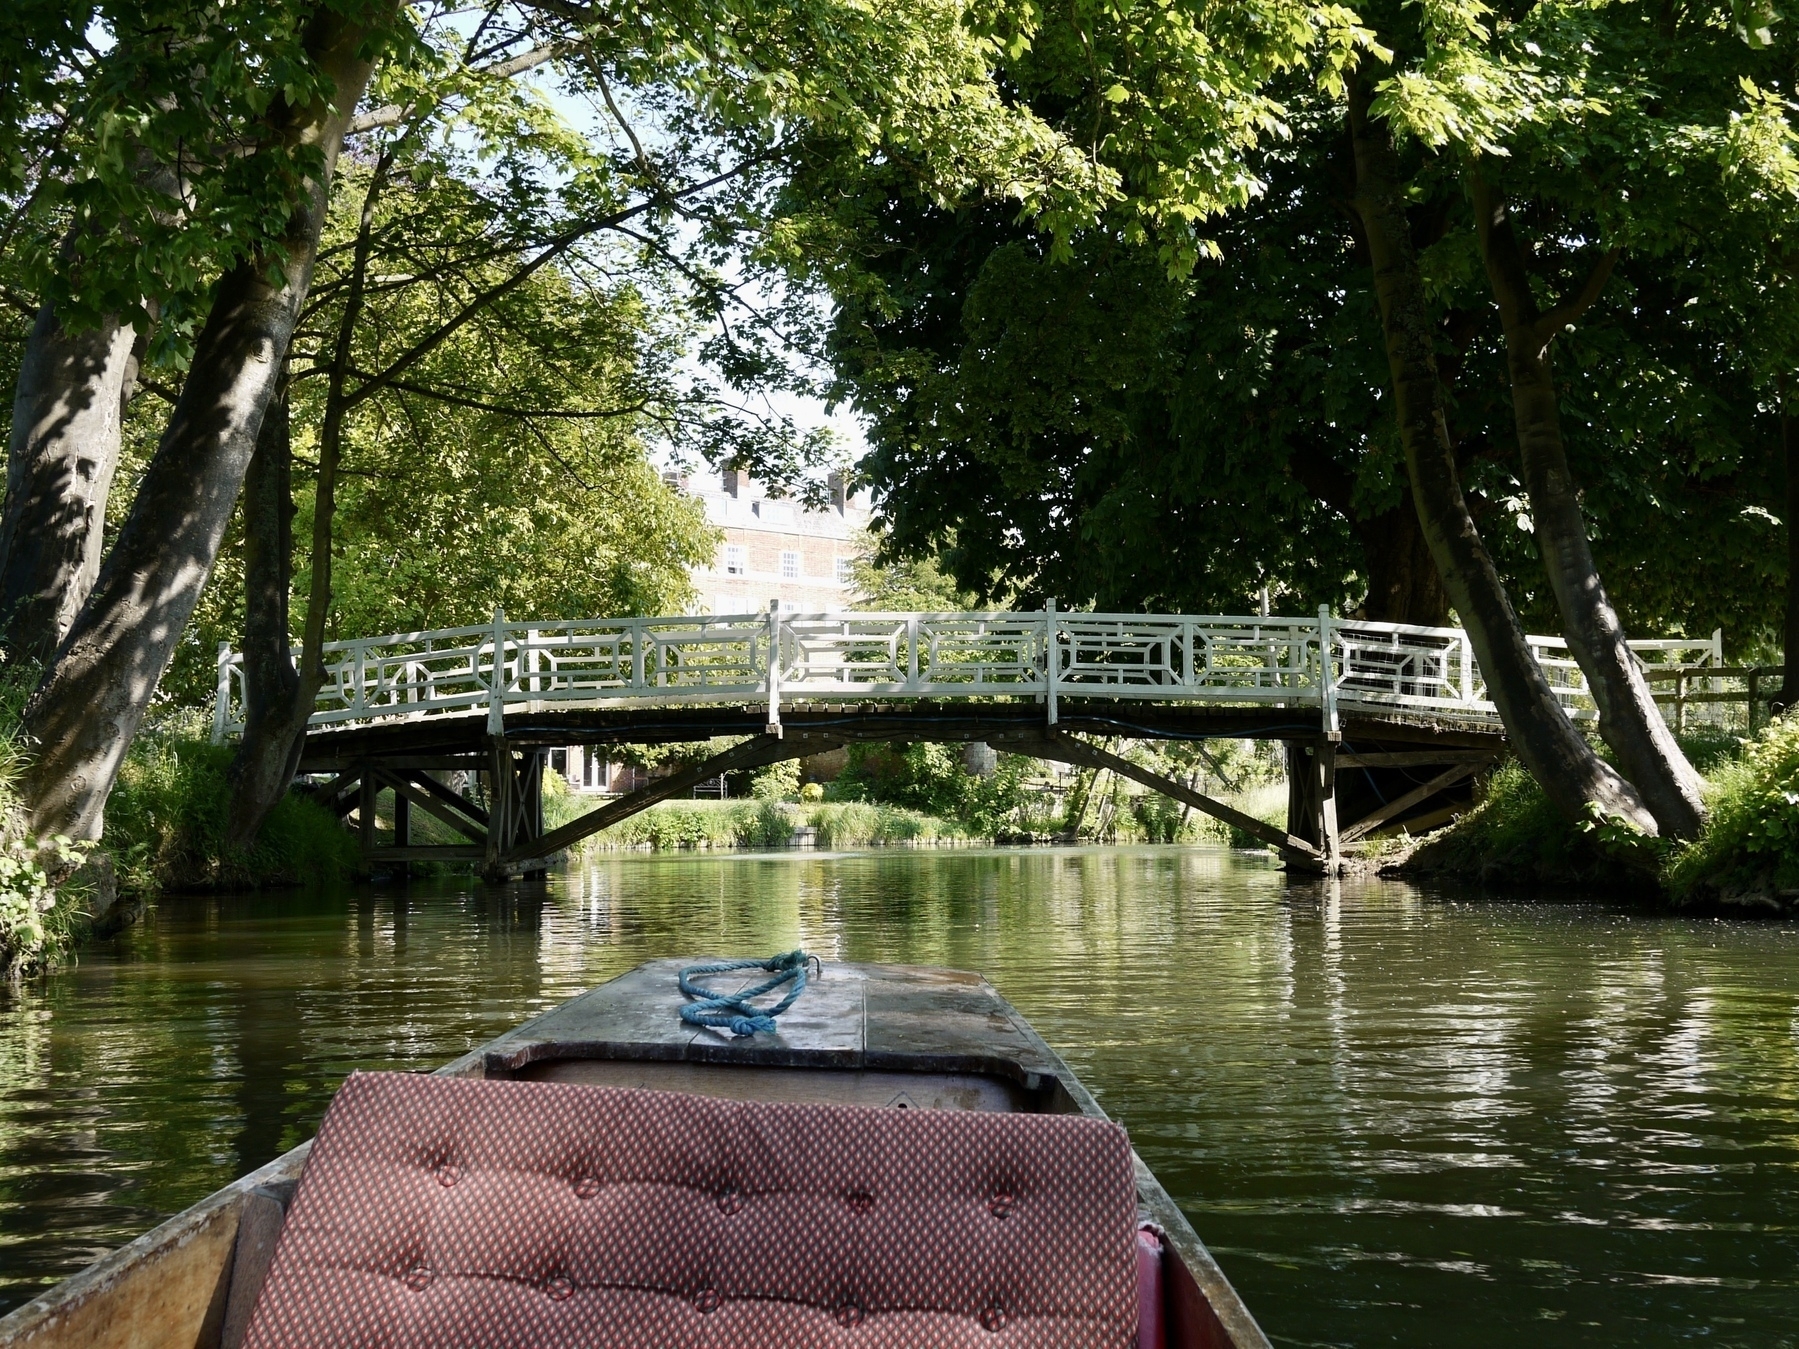 A punt on a tree-lined stretch of the River Cherwell in Oxford. A wooden bridge with white fencing crosses the river ahead of the punt.